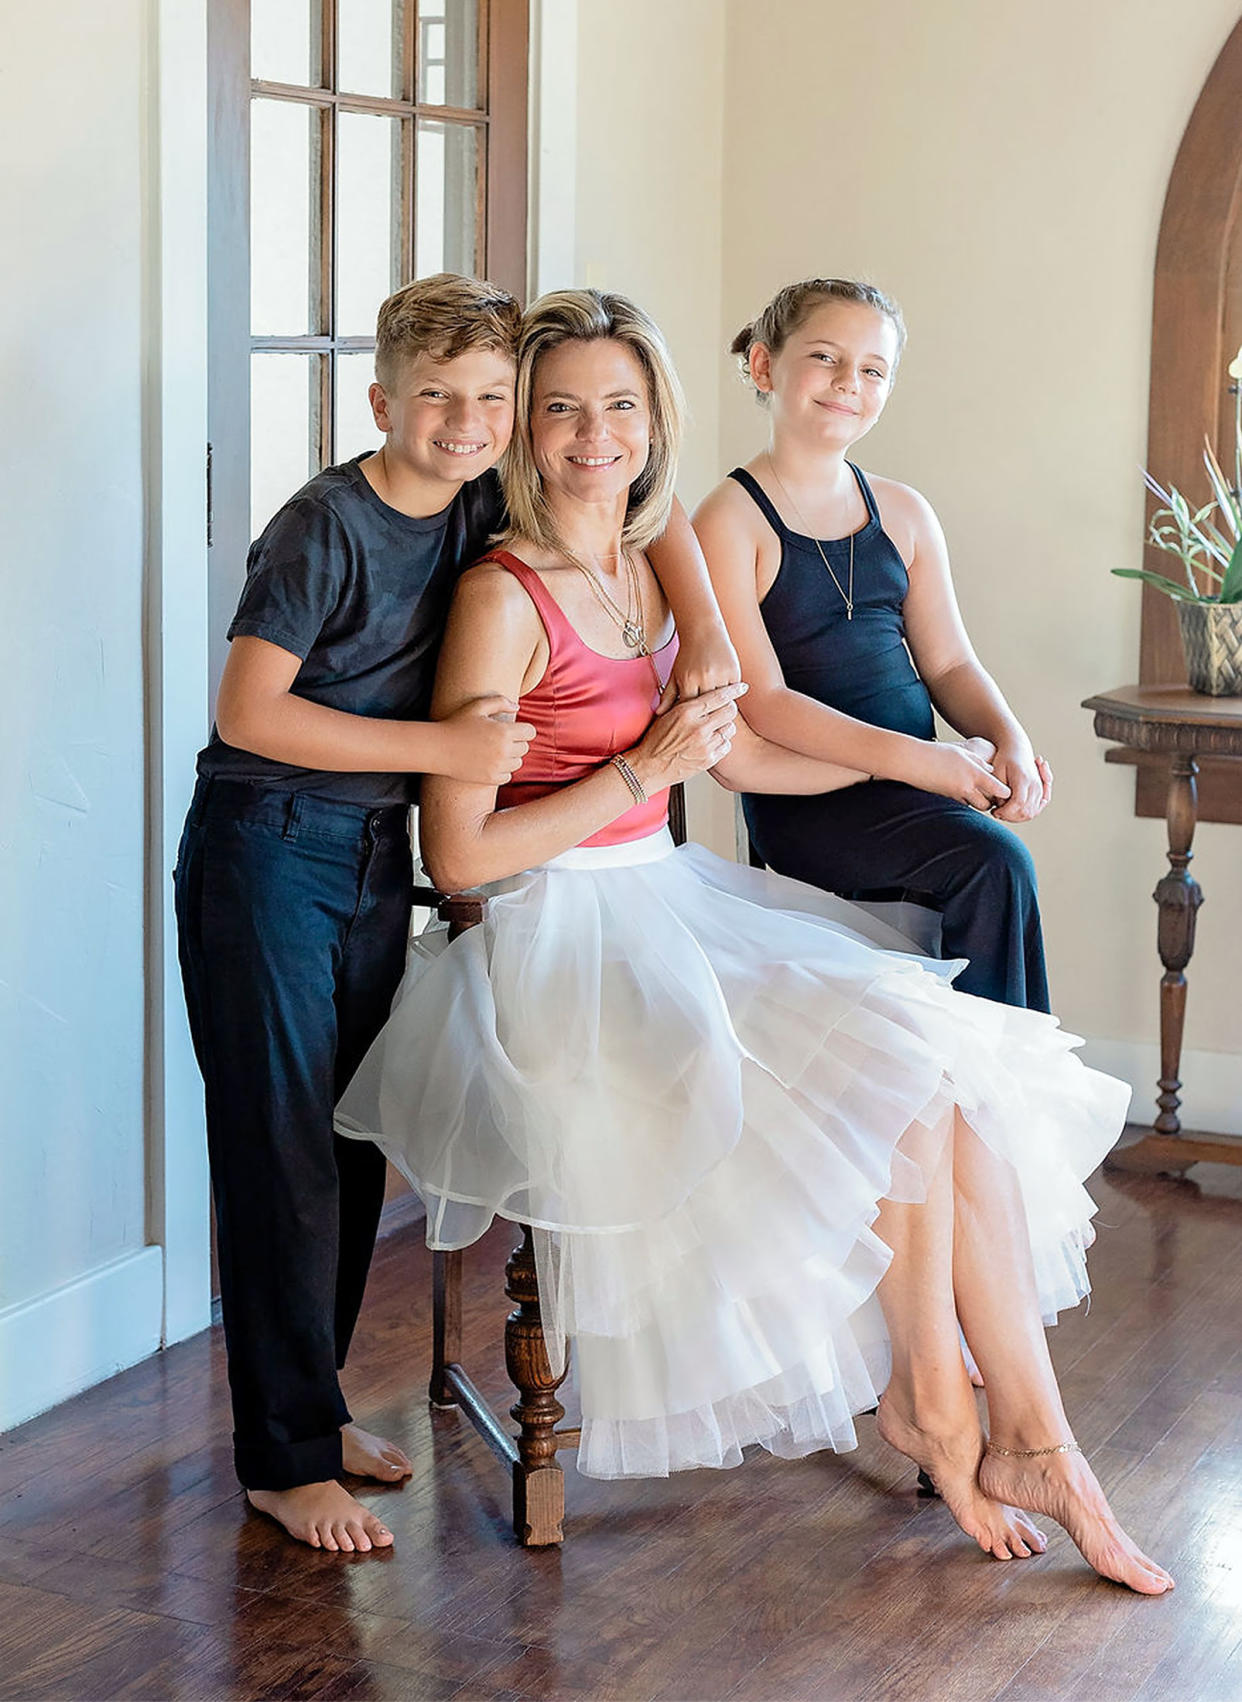 Amy Jordan thinks her children learned resilience by watching her go through treatment for a rare and aggressive cervical cancer. (Courtesy Erin LaBrecque Photography)